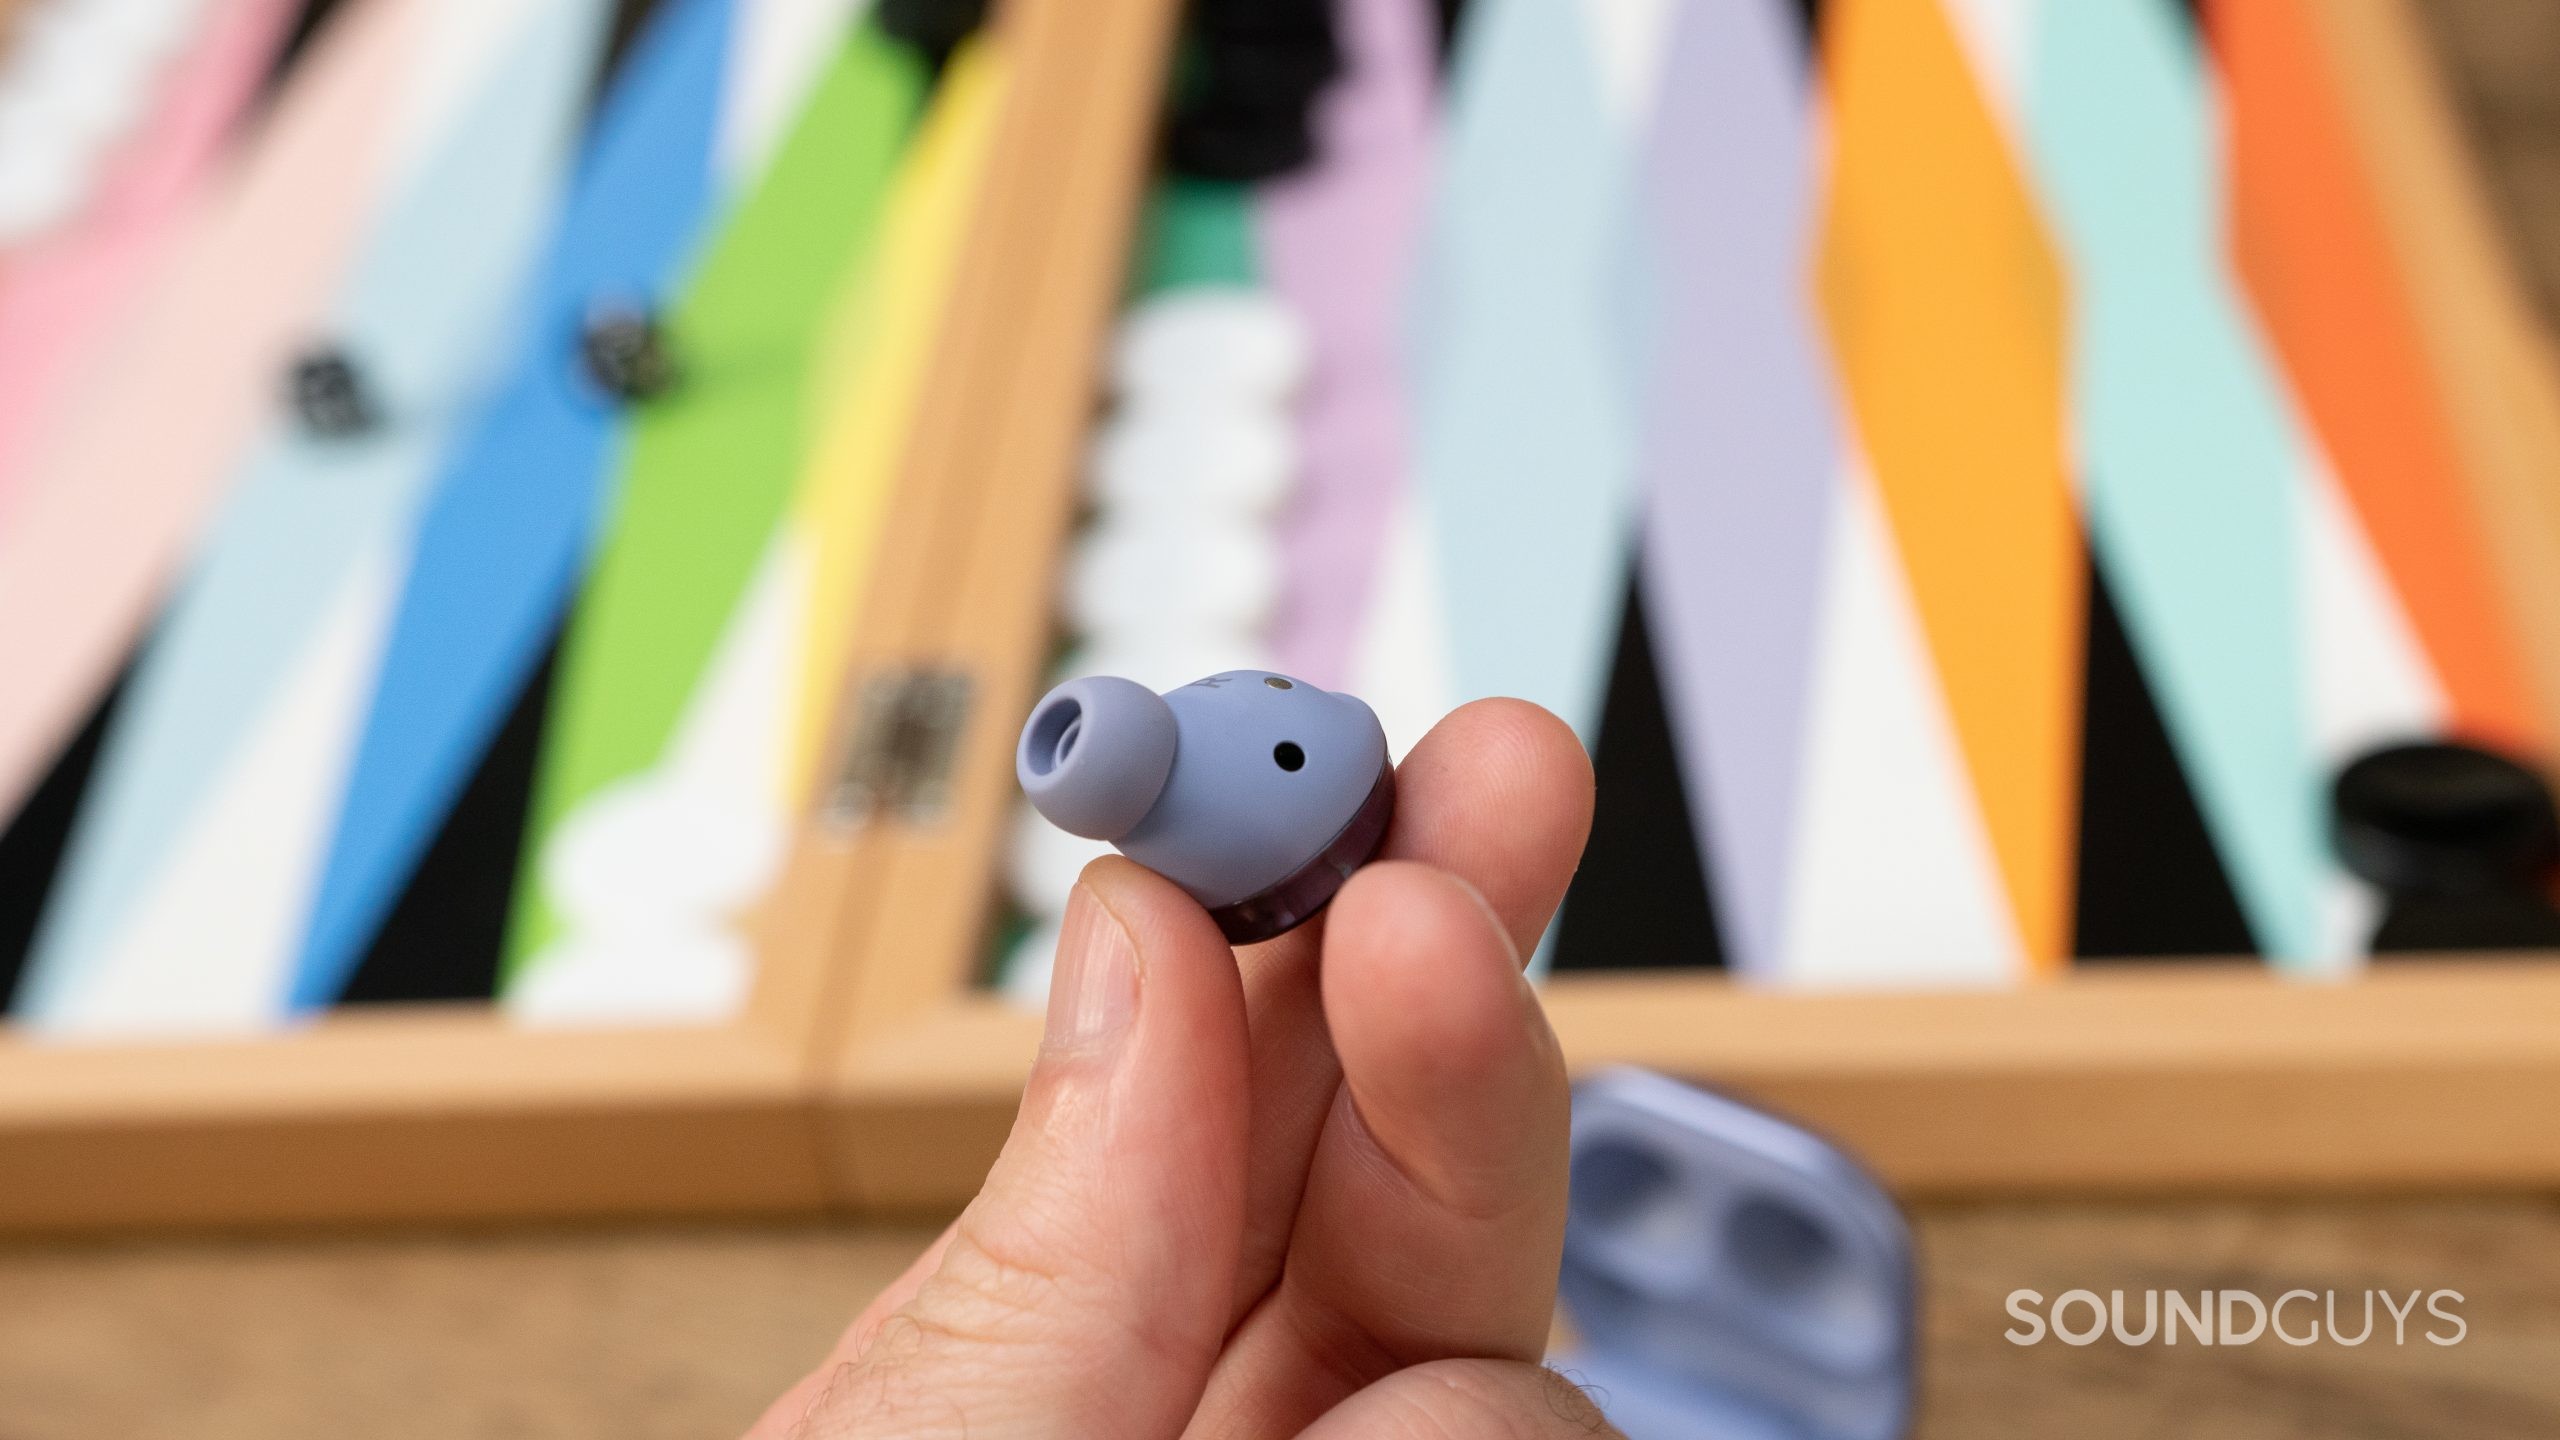 How to replace your Samsung Galaxy Buds earbuds - SoundGuys